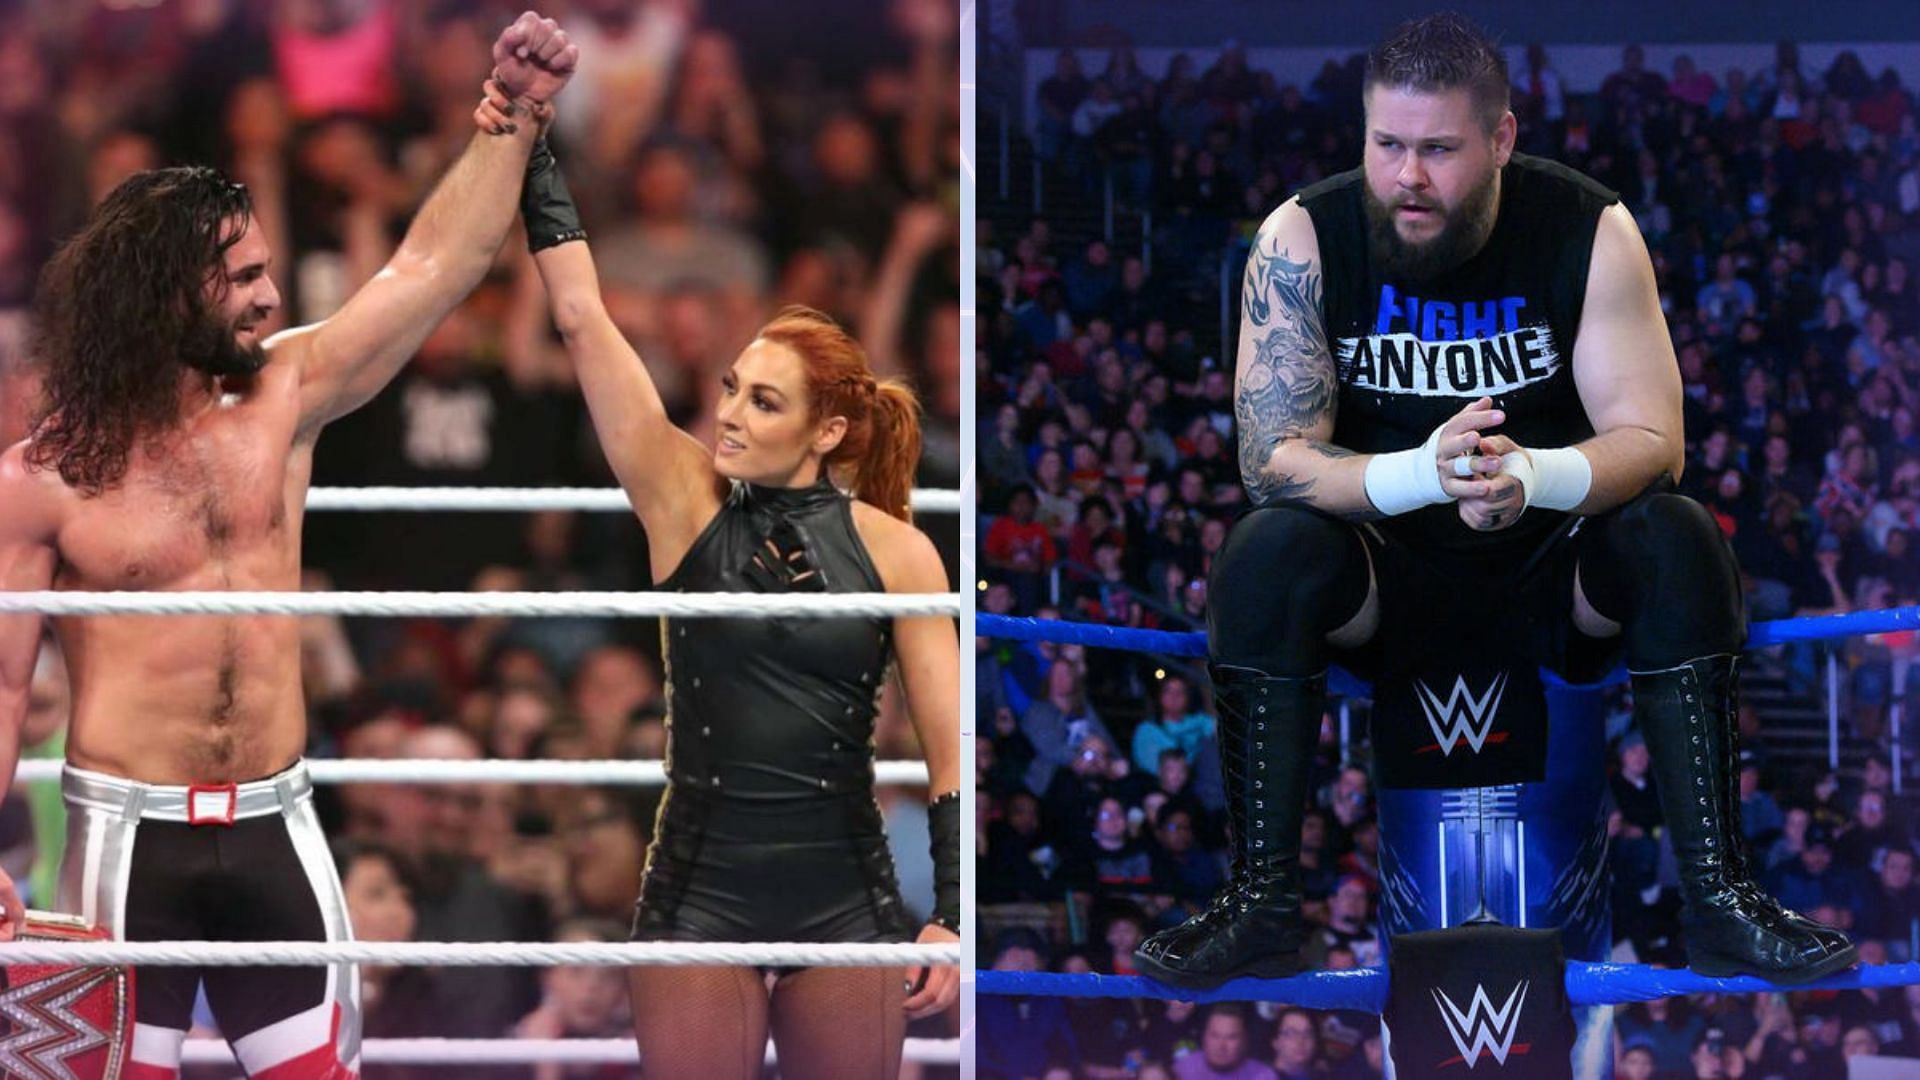 WWE Superstars Seth Rollins, Becky Lynch, and Kevin Owens